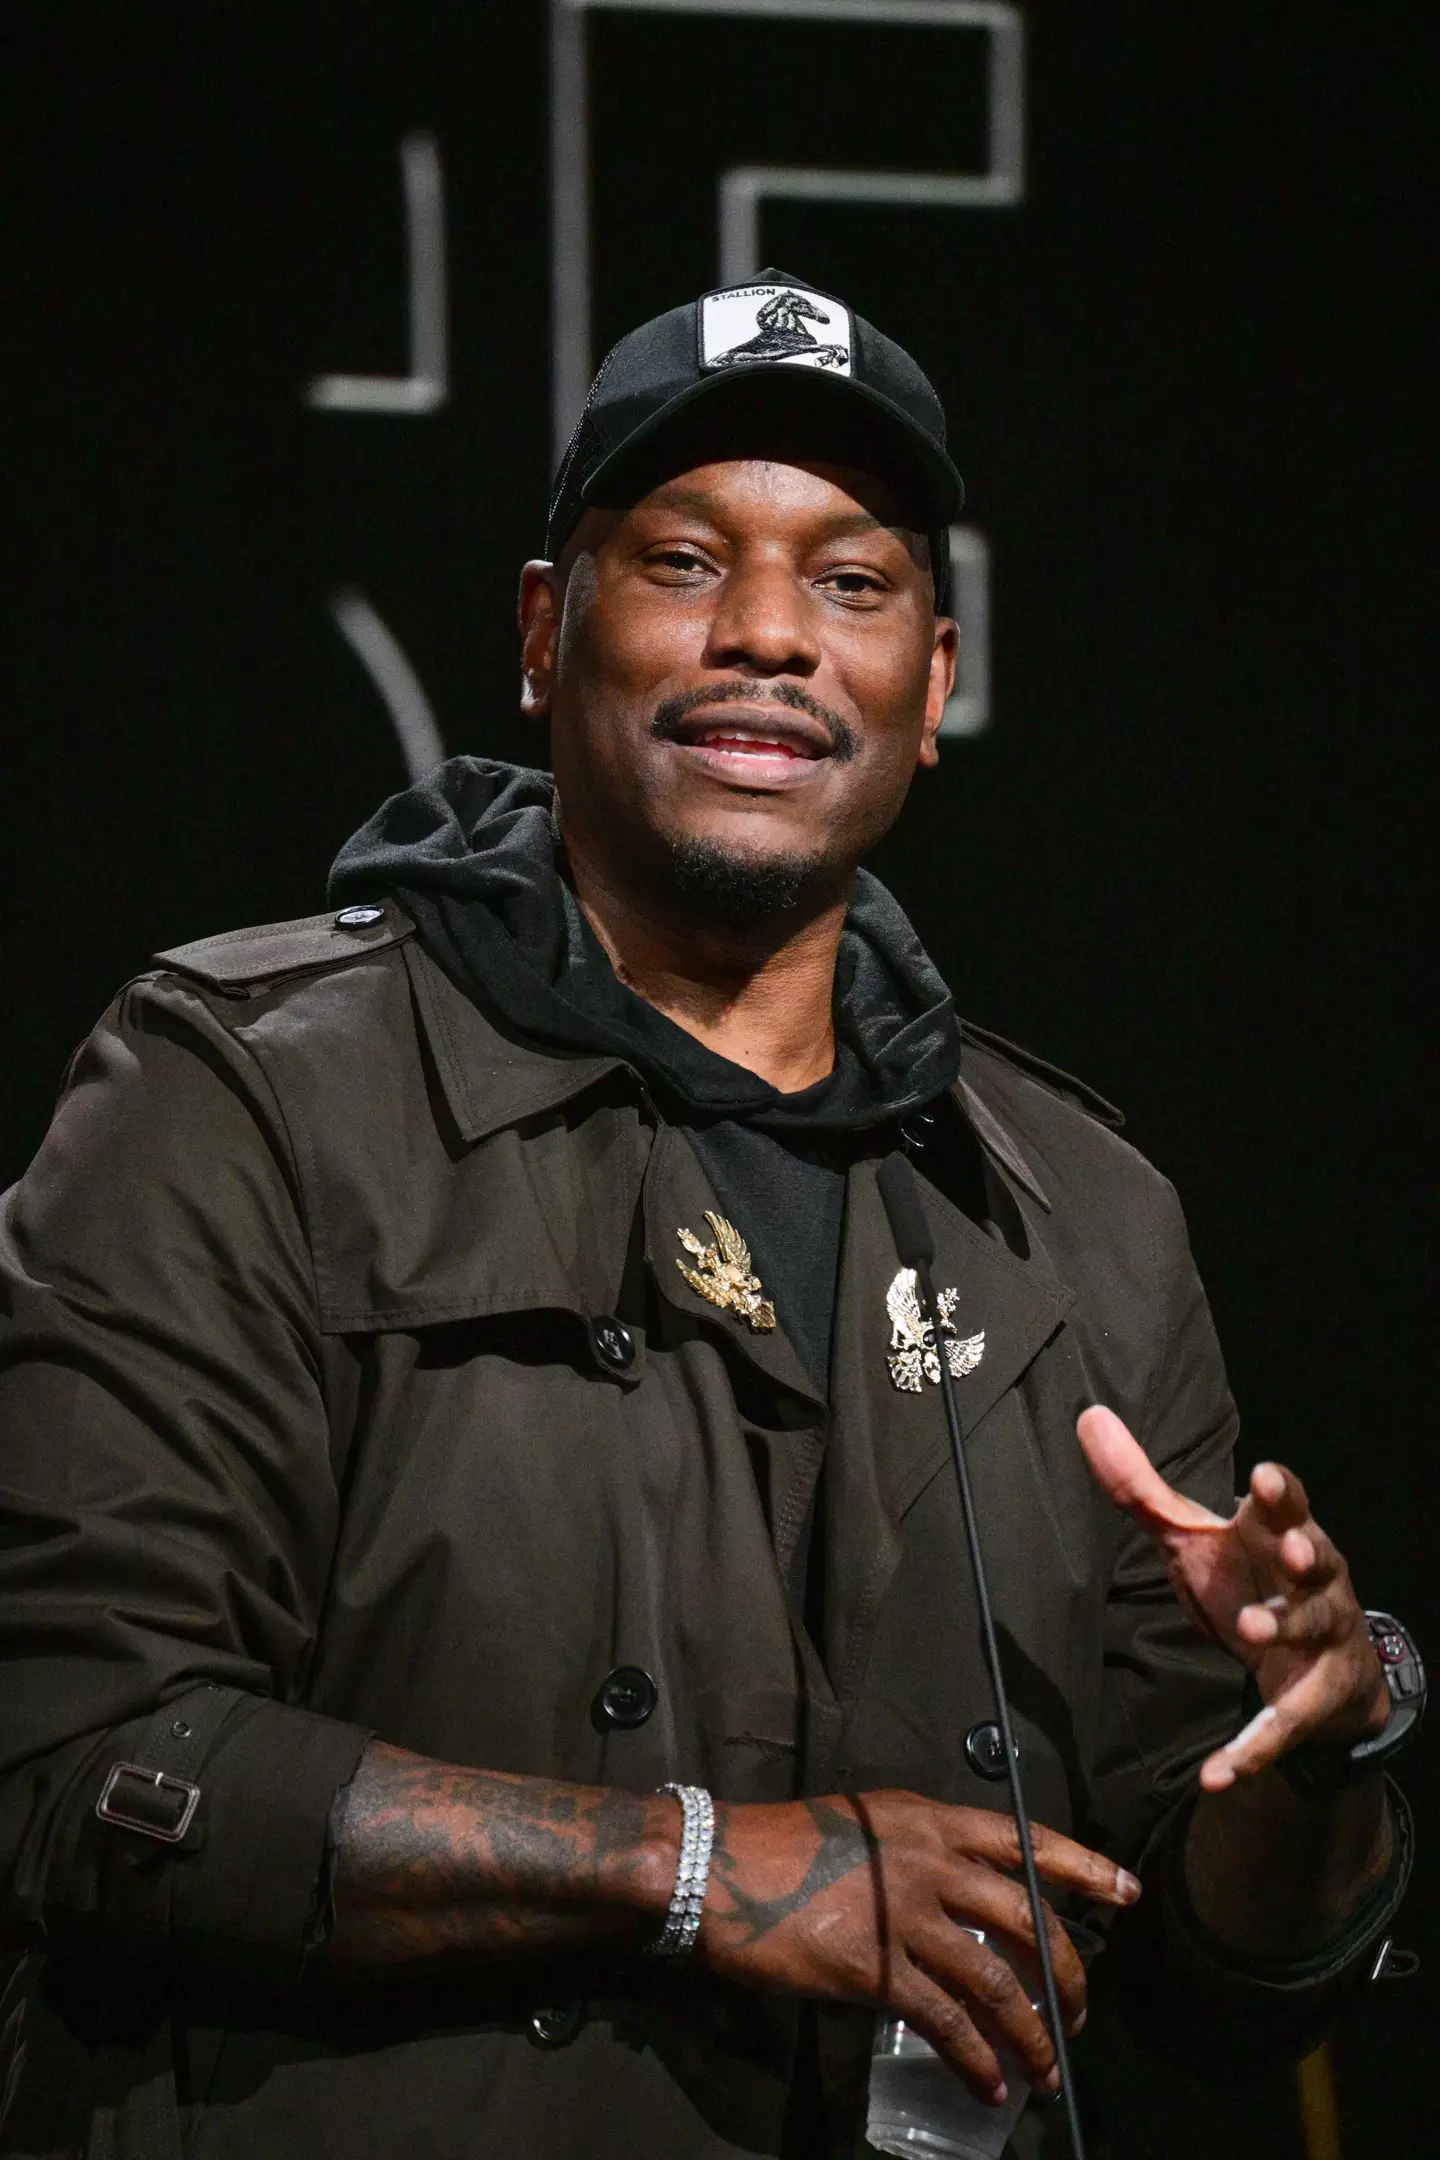 Tyrese Gibson is suing The Home Depot over 'racial profiling' allegations.